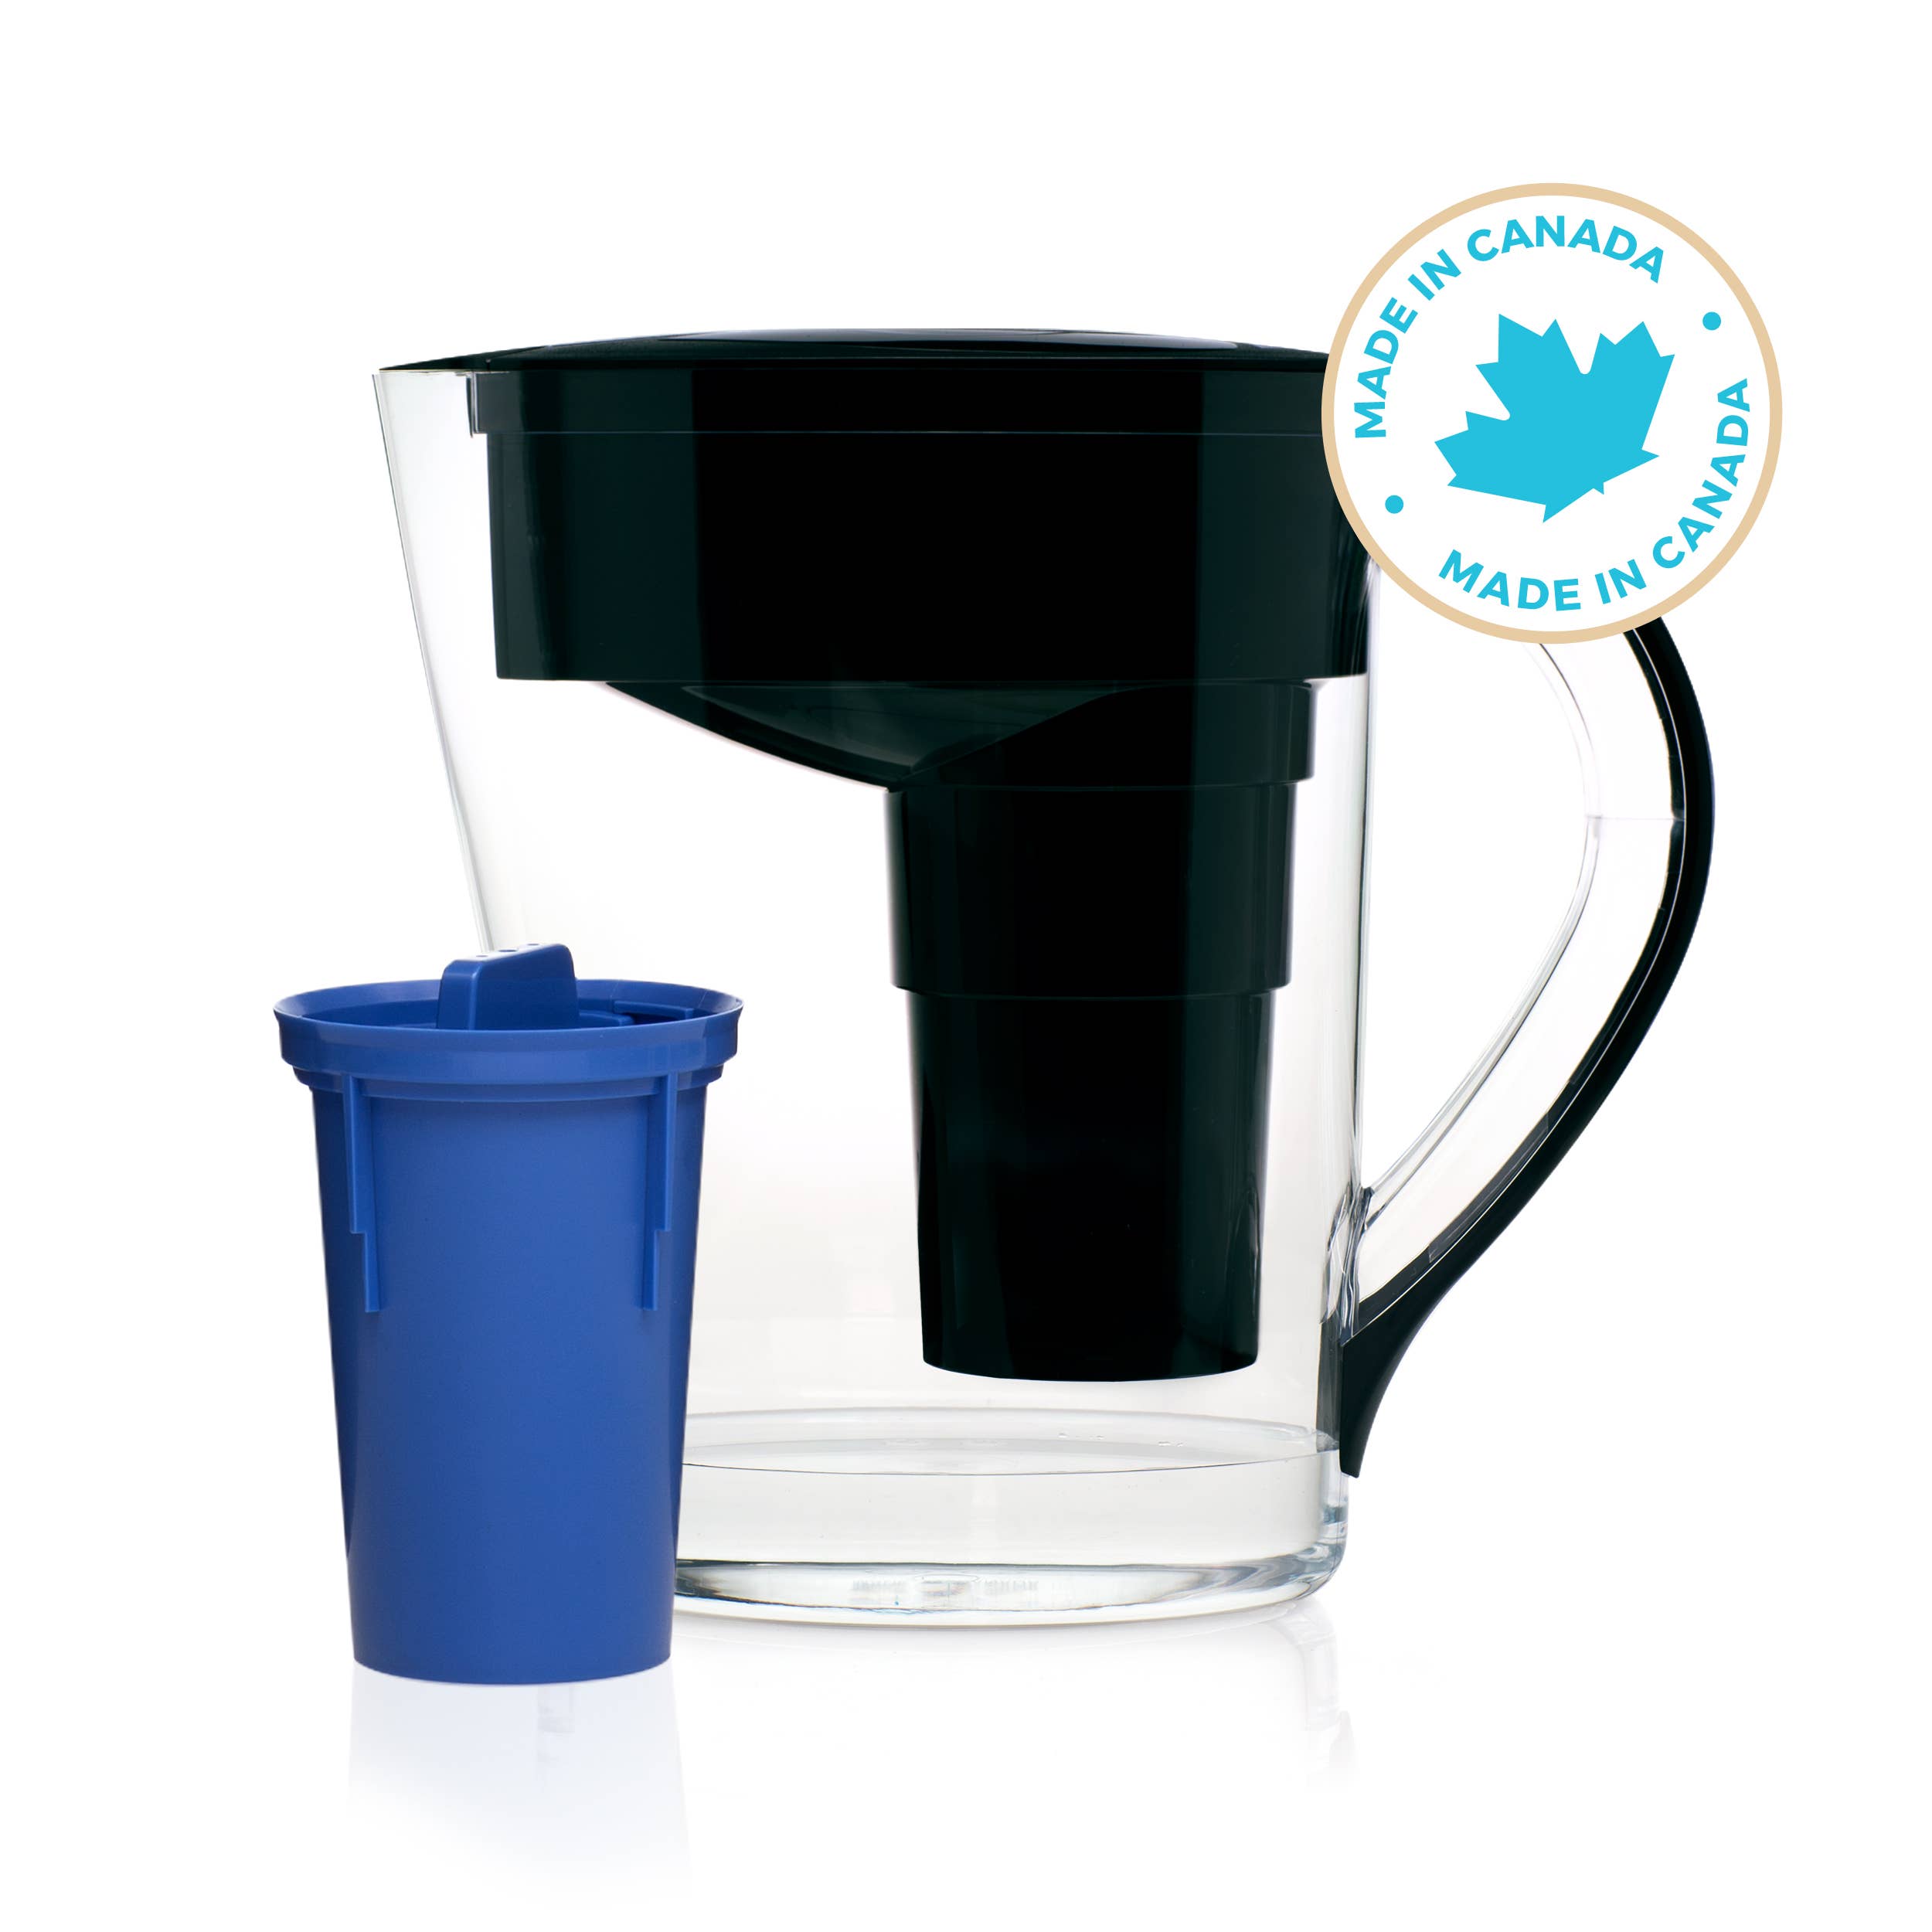 Alkaline Water Pitcher by Santevia Water Systems, Inc. - | MINA Model | available in Black or White